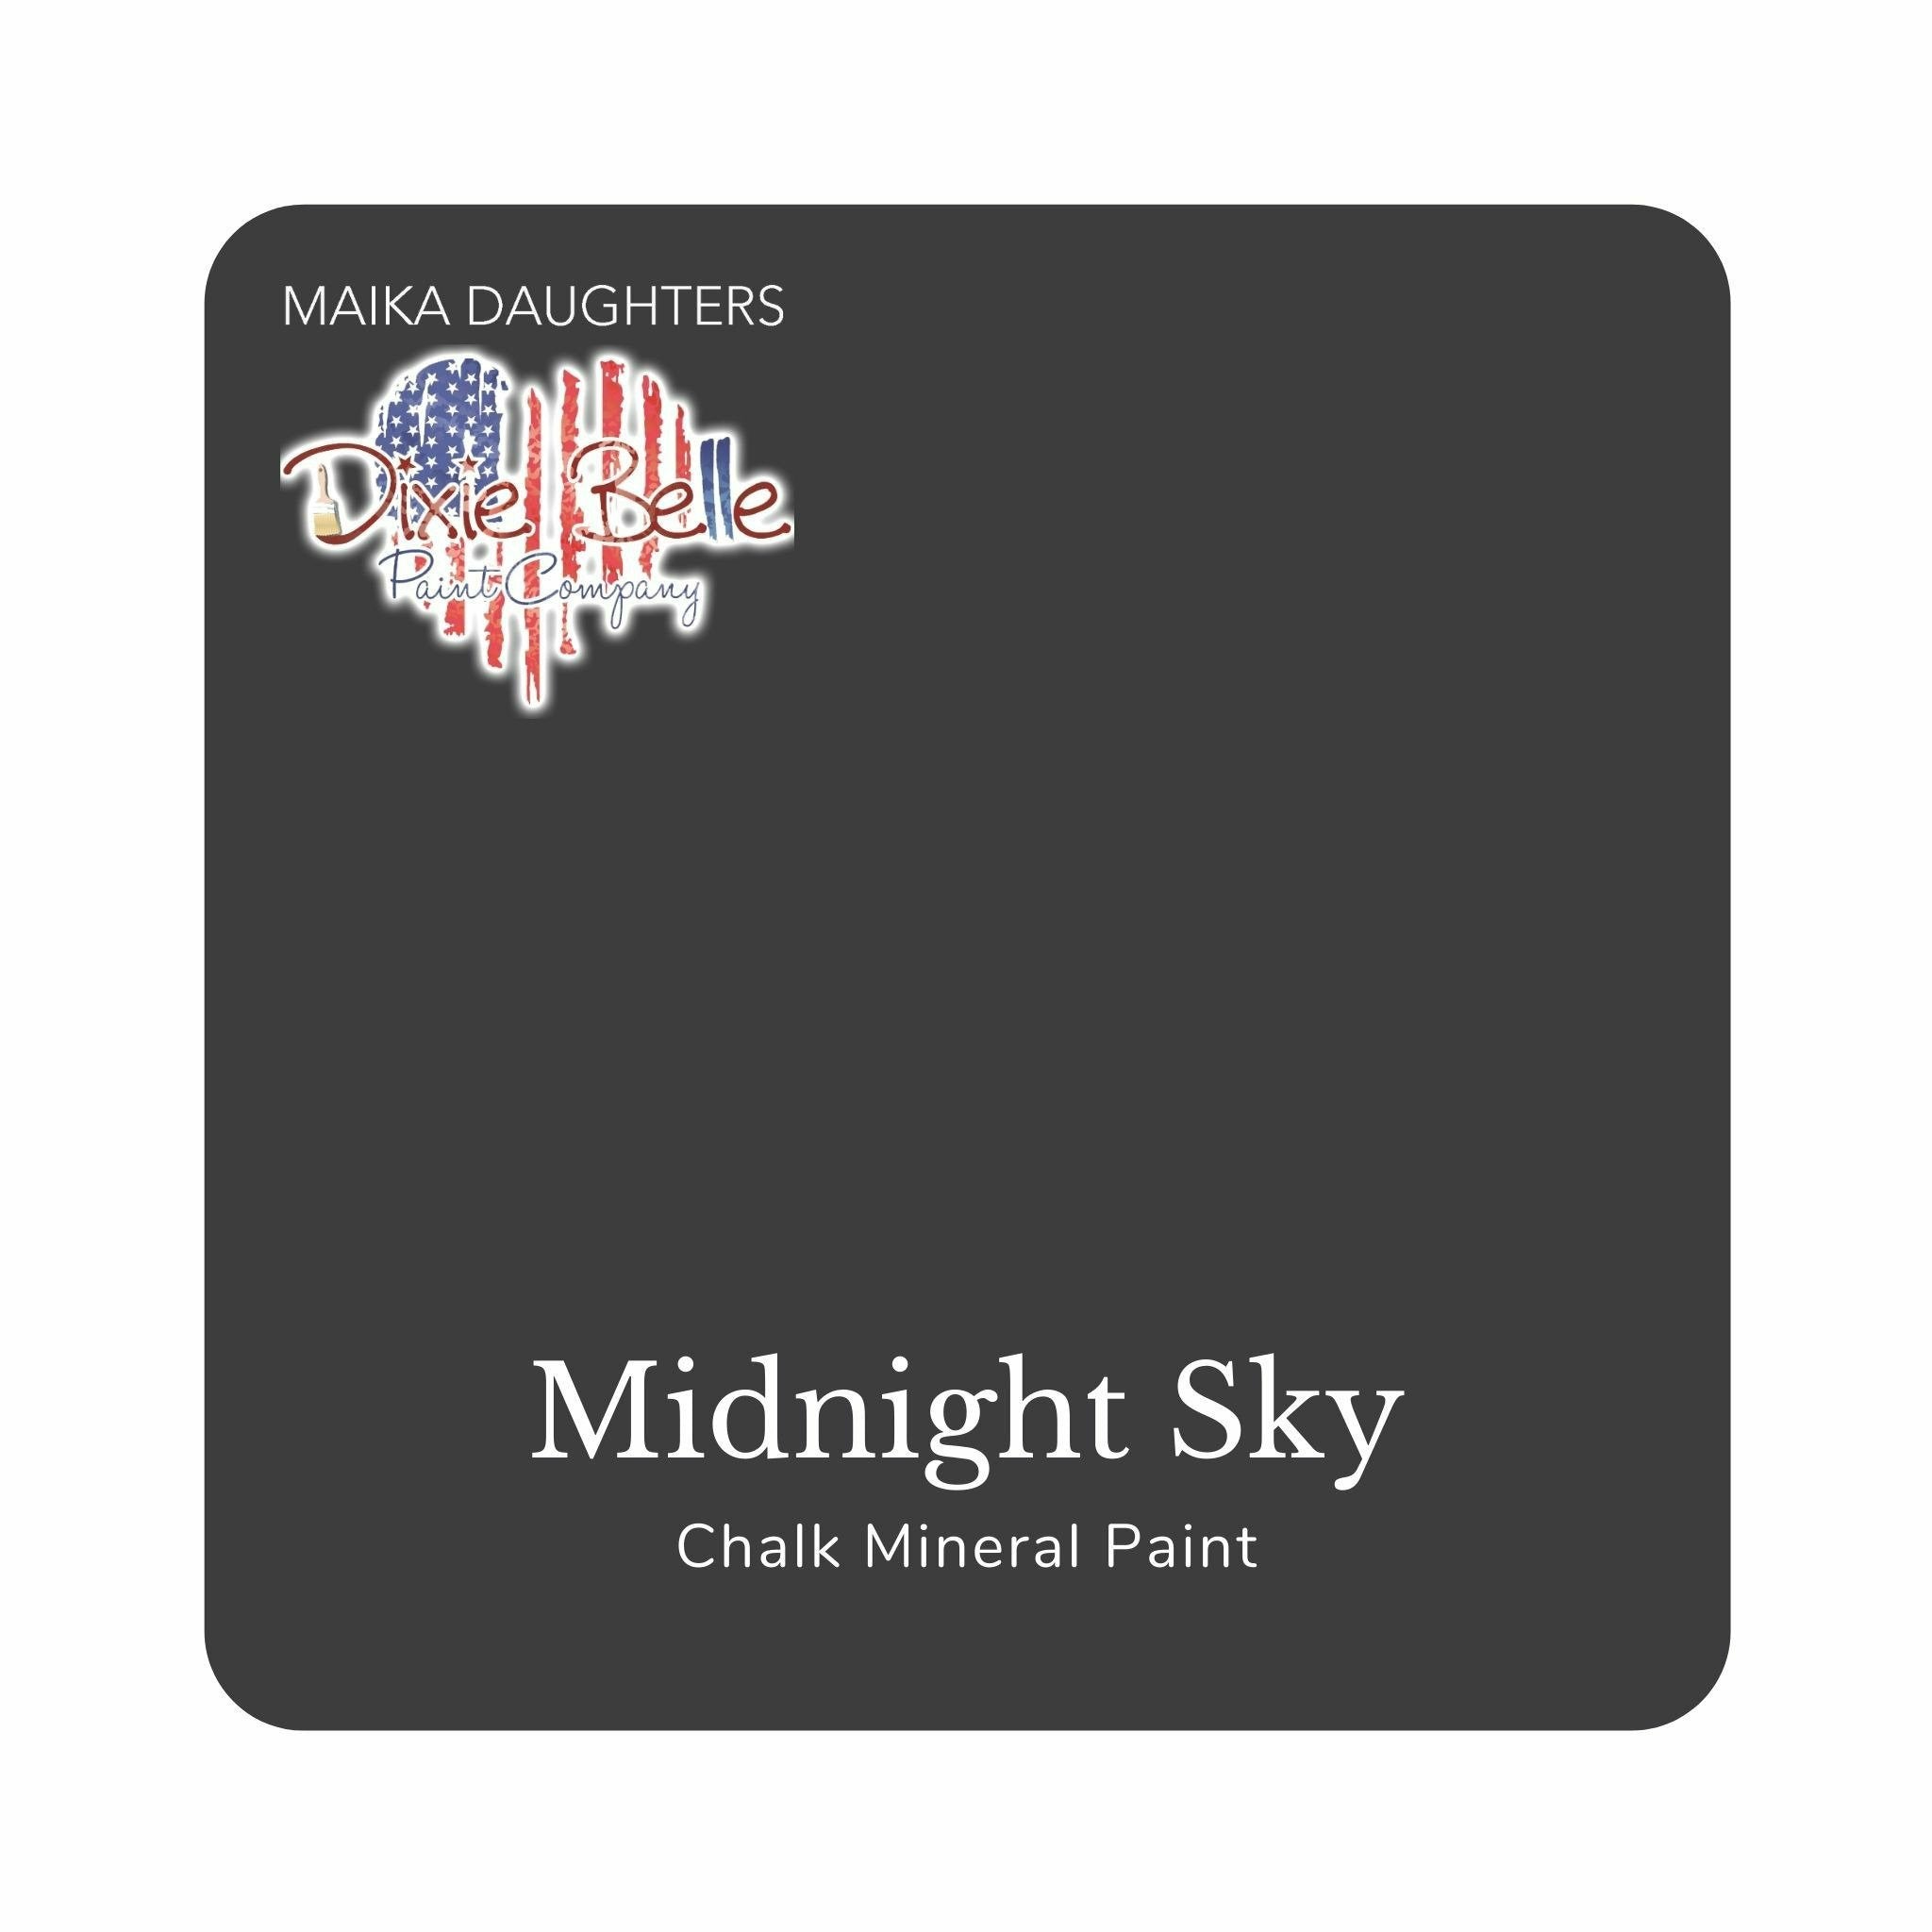 A square swatch card of Dixie Belle Paint Company’s Midnight Sky Chalk Mineral Paint is against a white background. This color is a dark slate gray.